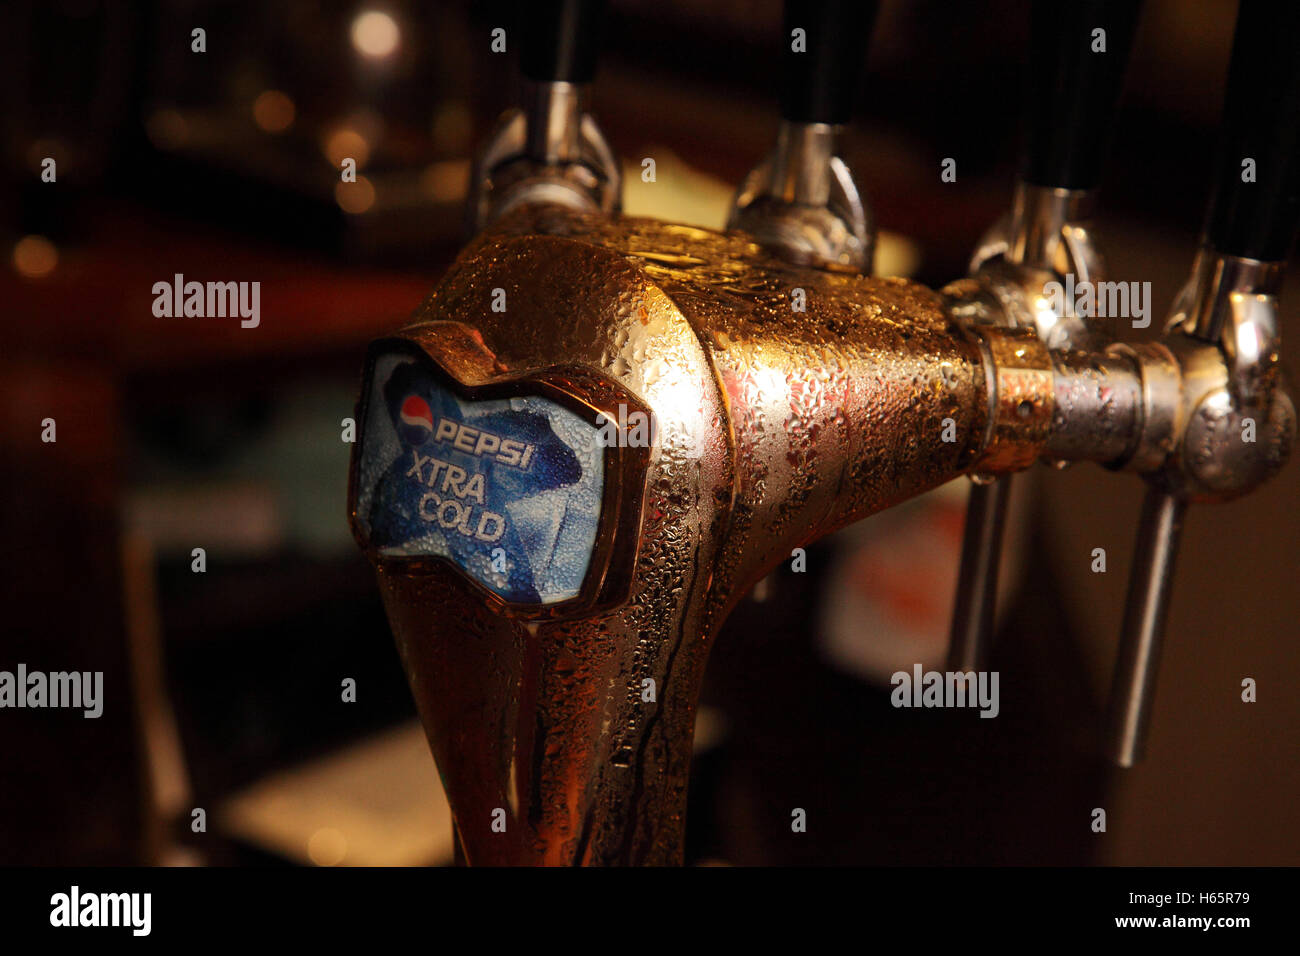 Pepsi extra cold tap in an English pub. Stock Photo